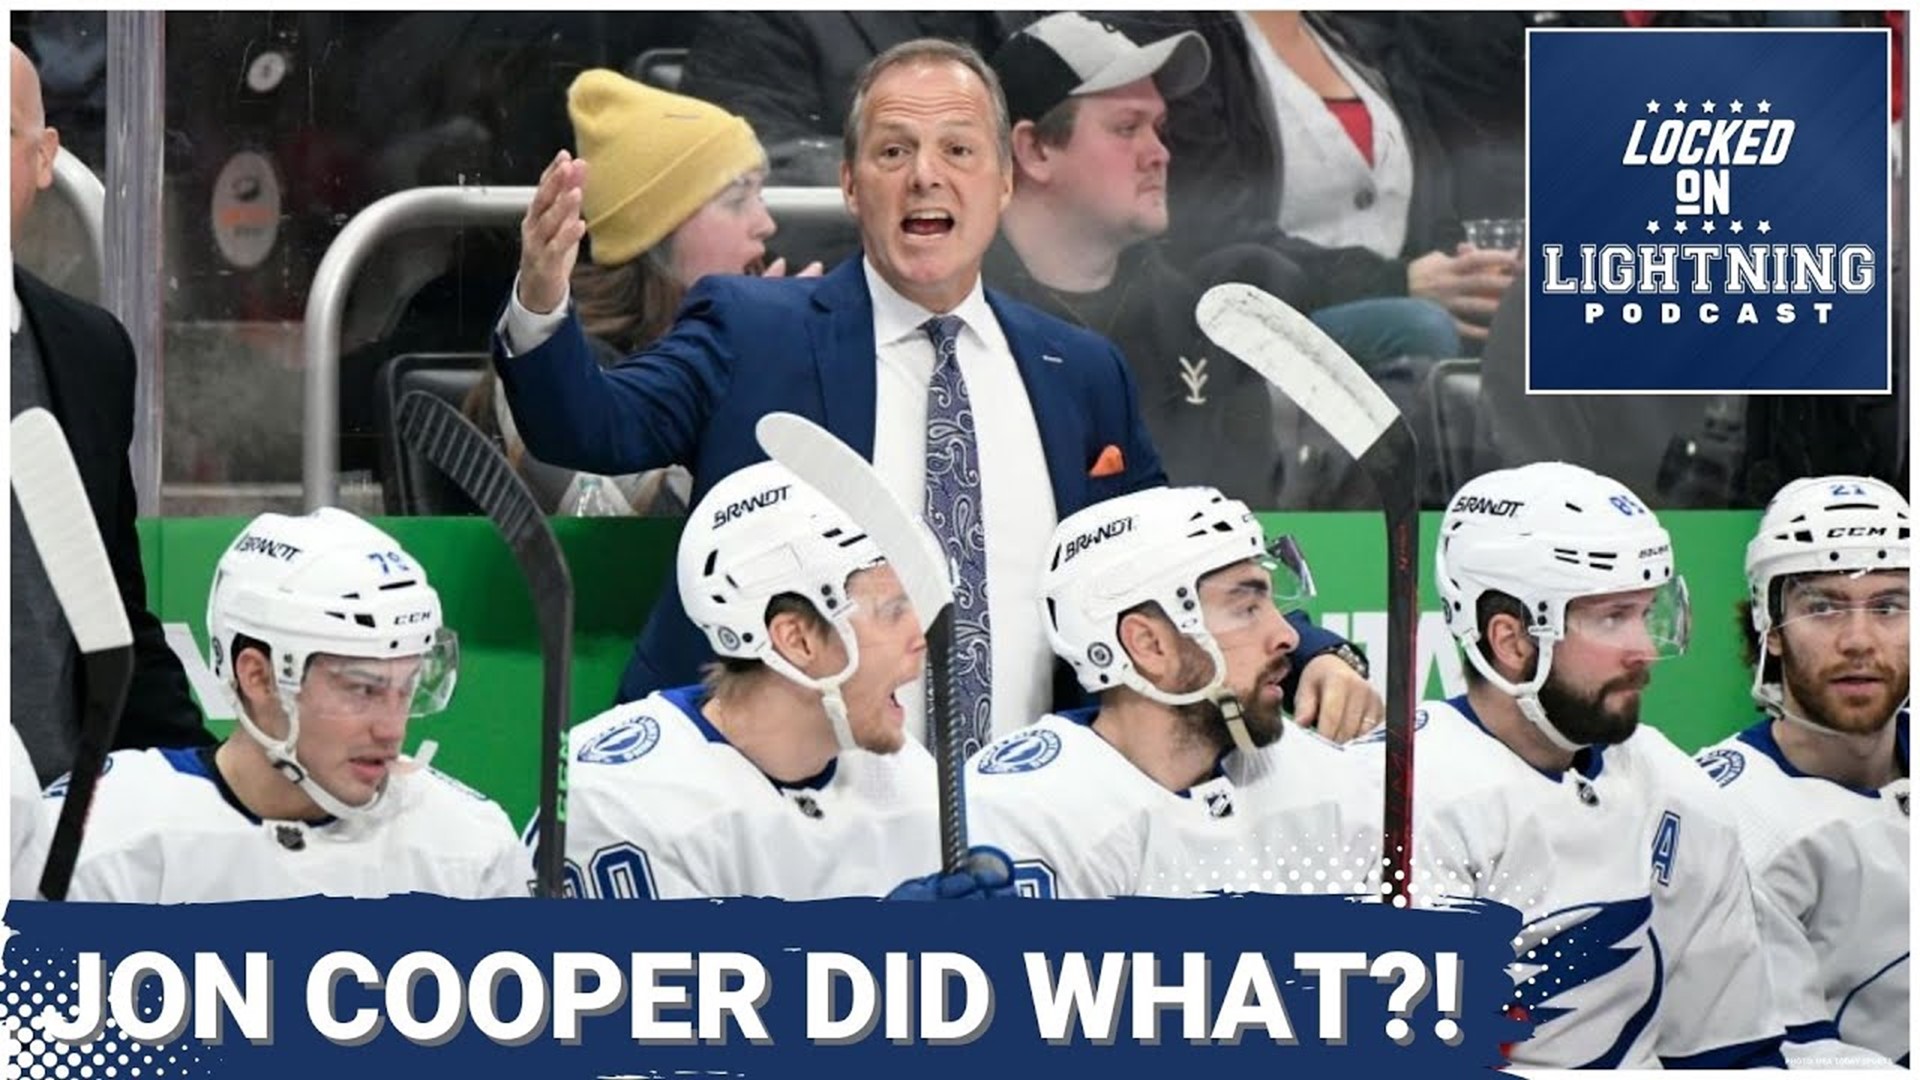 The Tampa Bay Lightning dropped another two games over the weekend, extending their losing streak to five games. Adam Denker discusses the strange coaching decisions